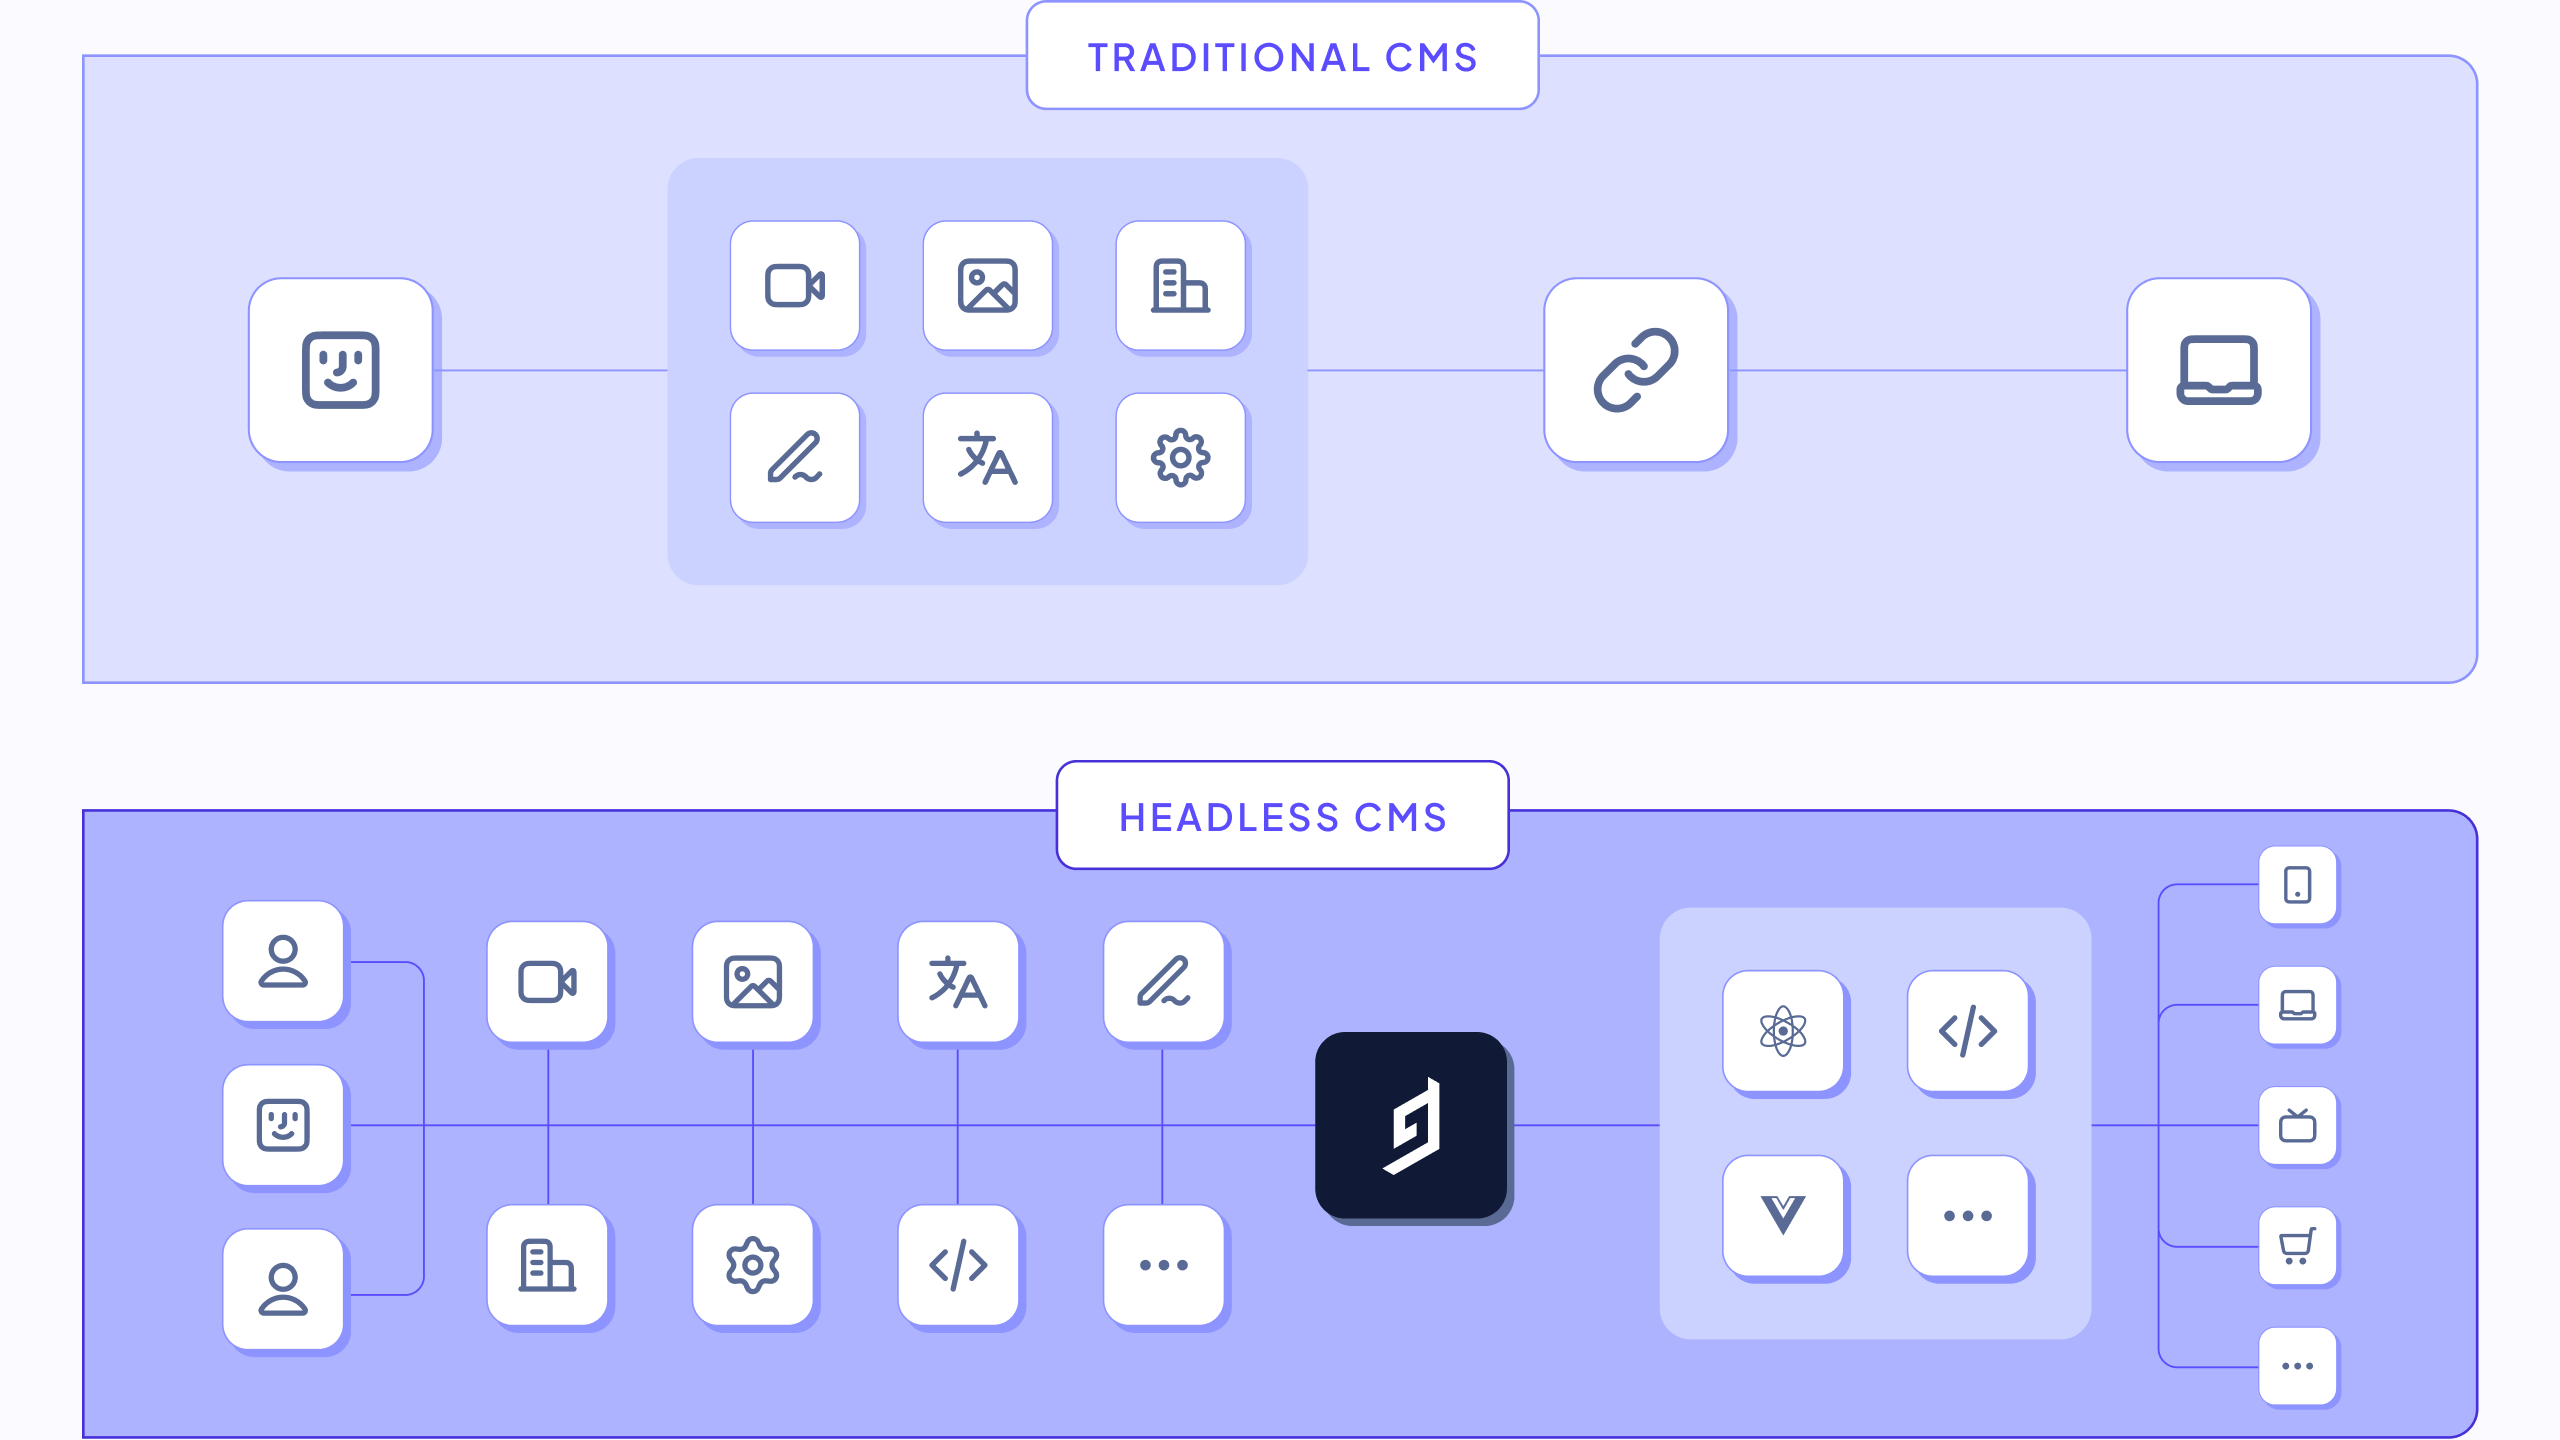 Headless cms vs traditional cms - how they work